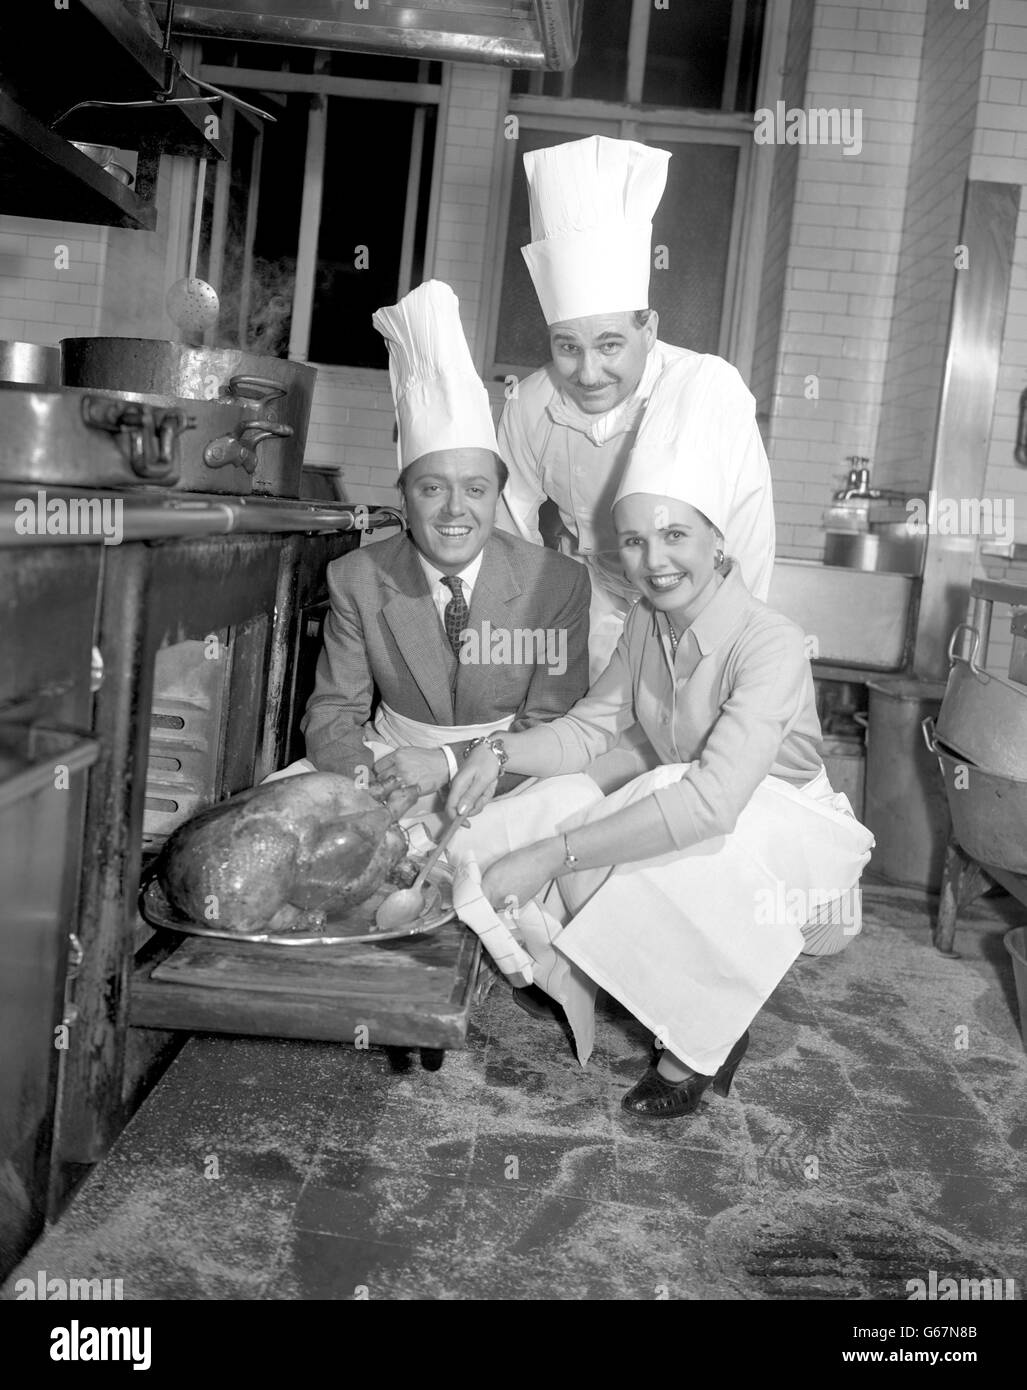 Richard Attenborough and his wife Sheila Sim, who are playing in 'Double Image' at the Savoy Theatre, London, popped in to visit the kitchens of the adjoining Savoy Hotel. They received some expert advice on cooking the Christmas turkey from Monsieur Auguste Laplanche, Chef de Cuisine, of the Savoy Restaurant. Stock Photo